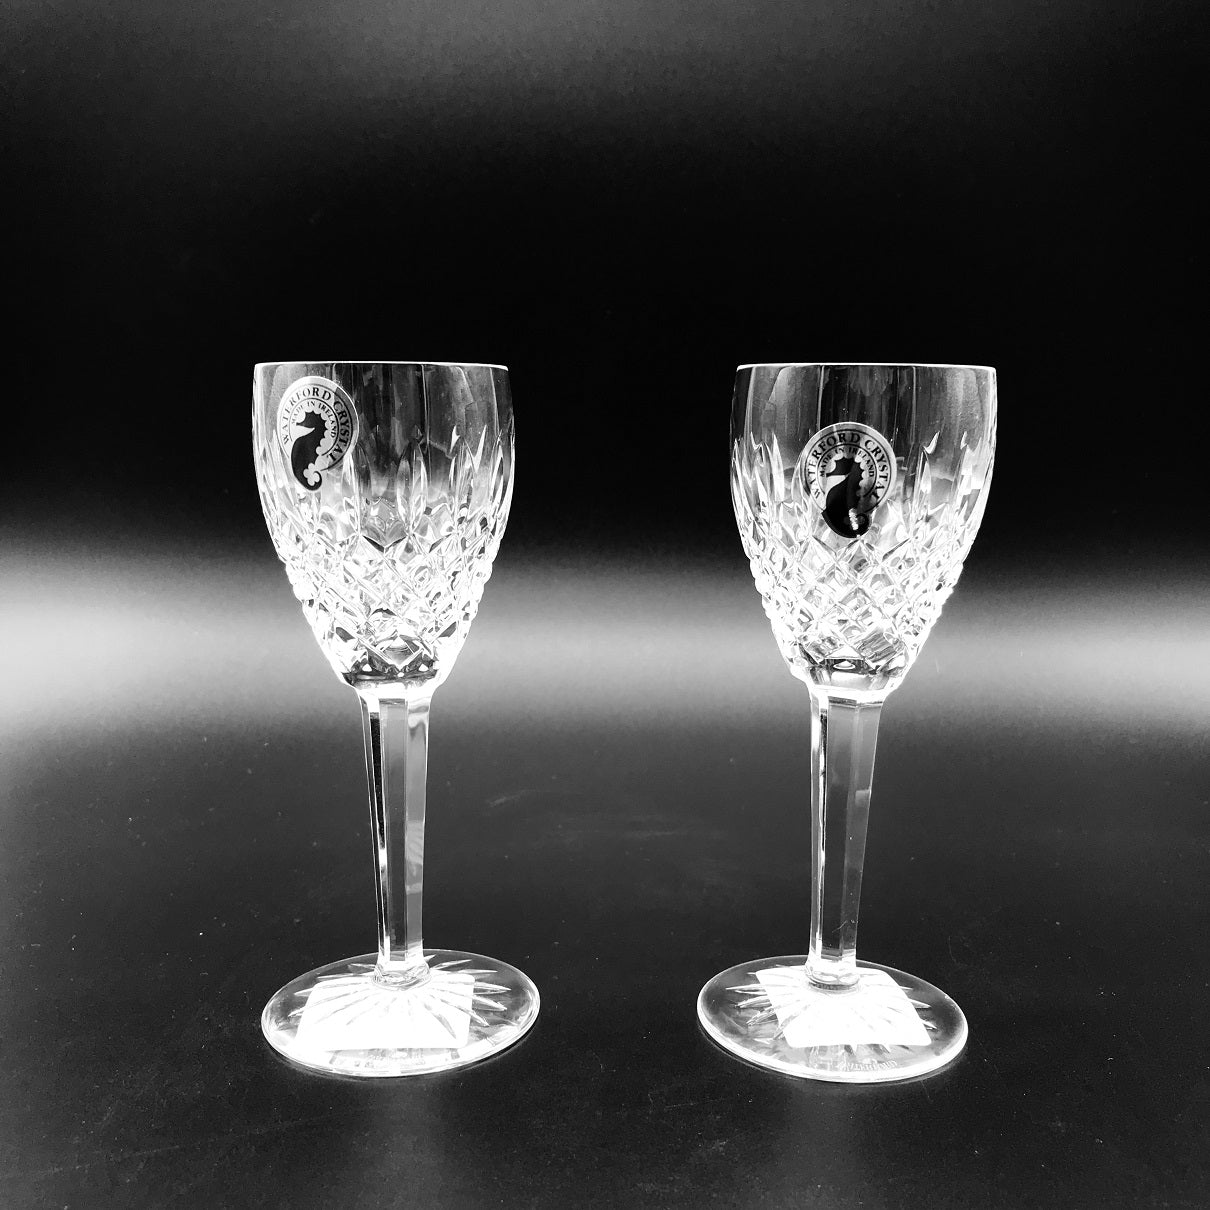 Castlemaine Sherry Pair Waterford Crystal